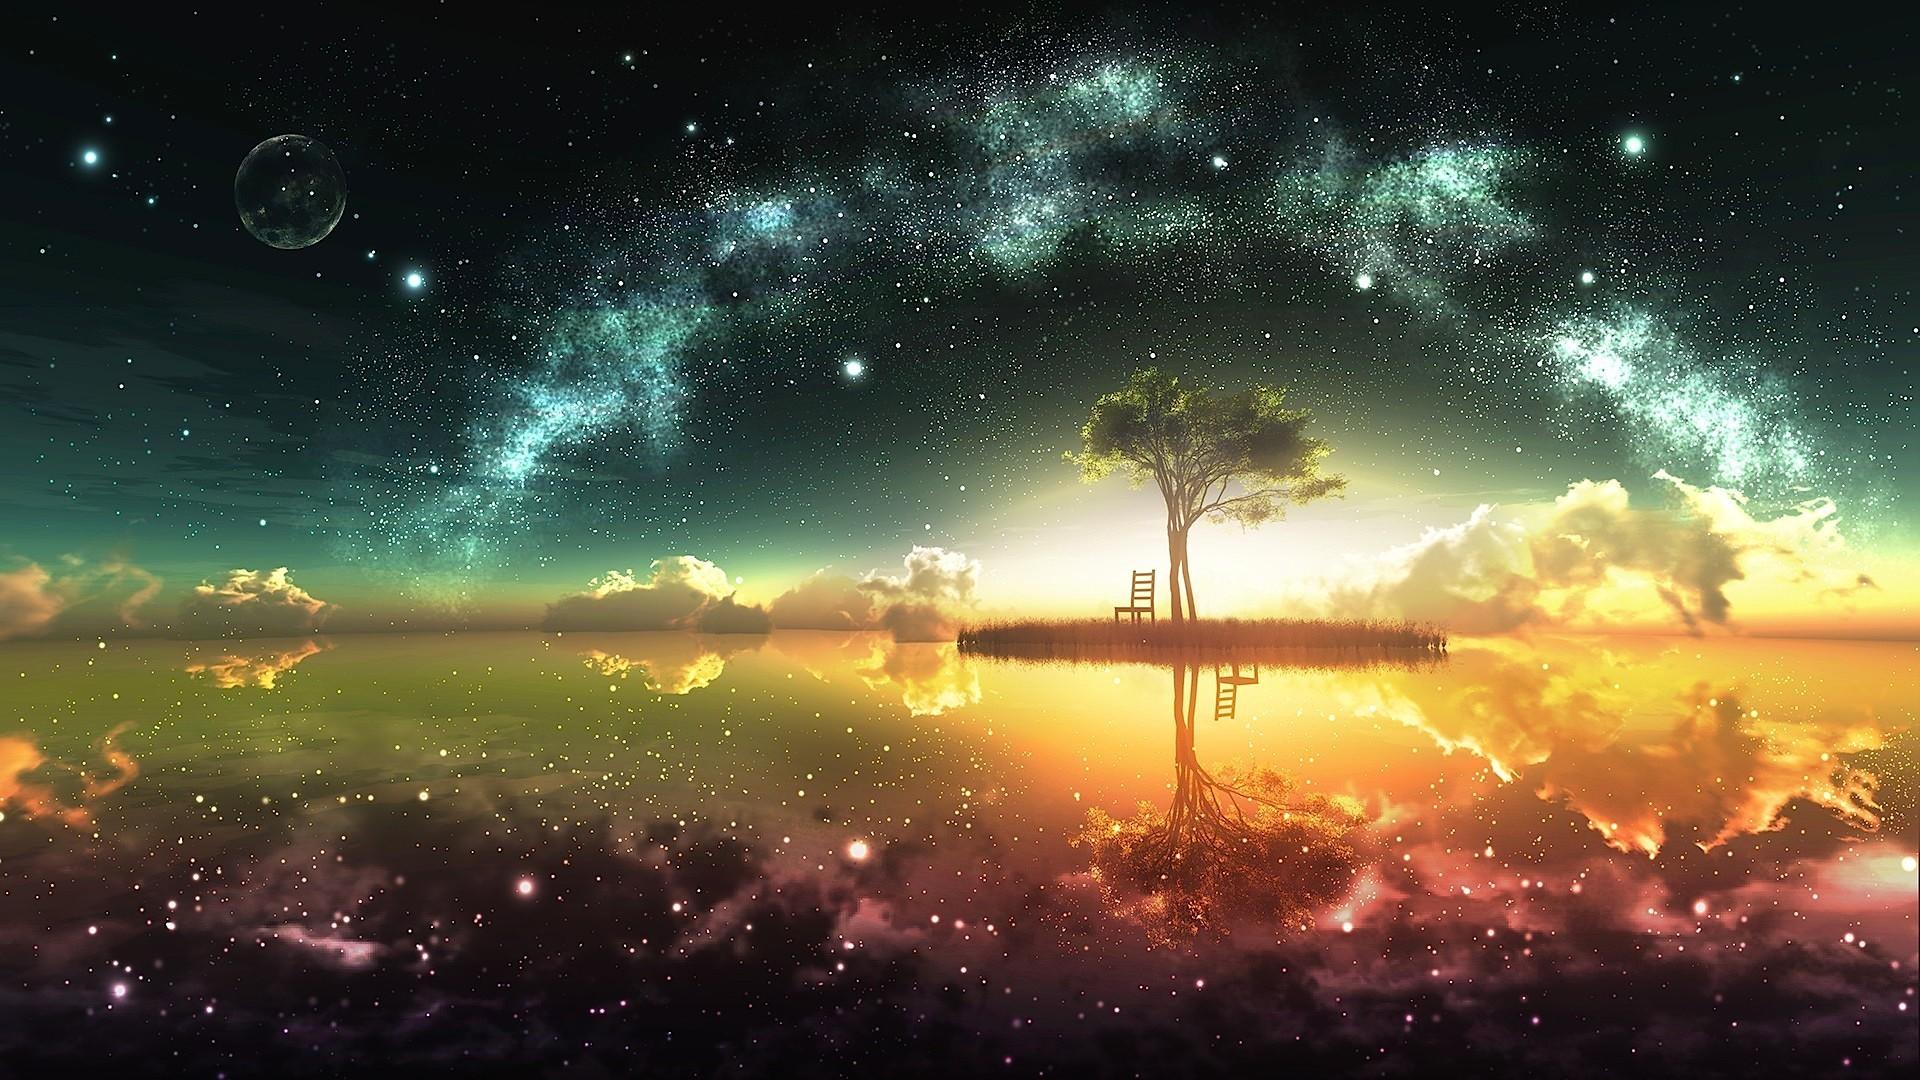 Night Sky Anime Wallpaper Stock Photo, Picture and Royalty Free Image.  Image 206808453.